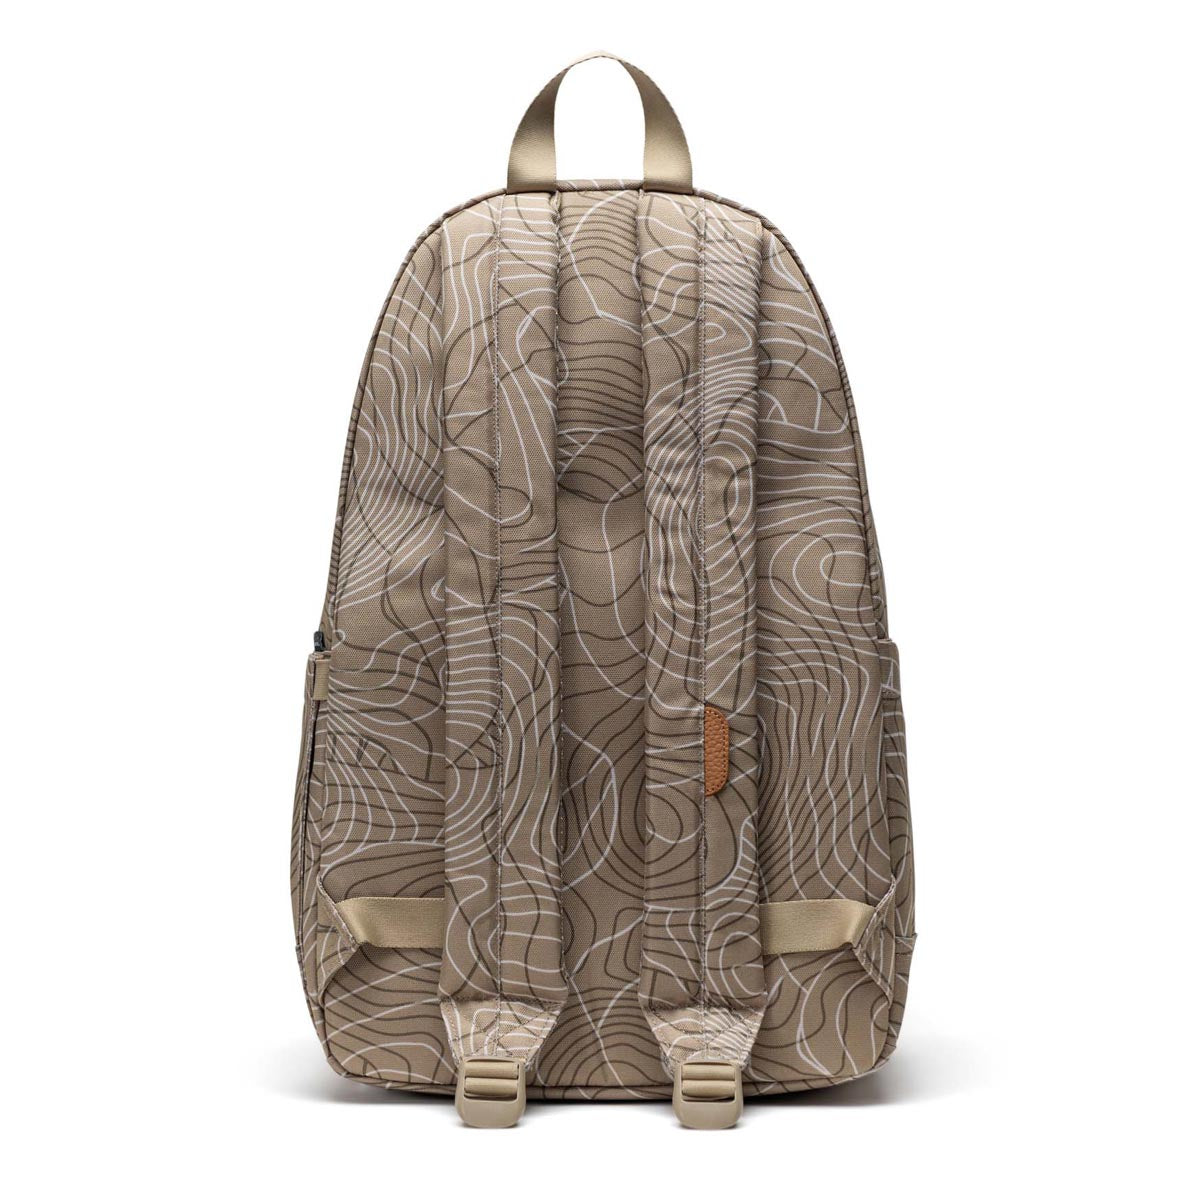 Herschel Supply Heritage Backpack - Twill Topography image 2